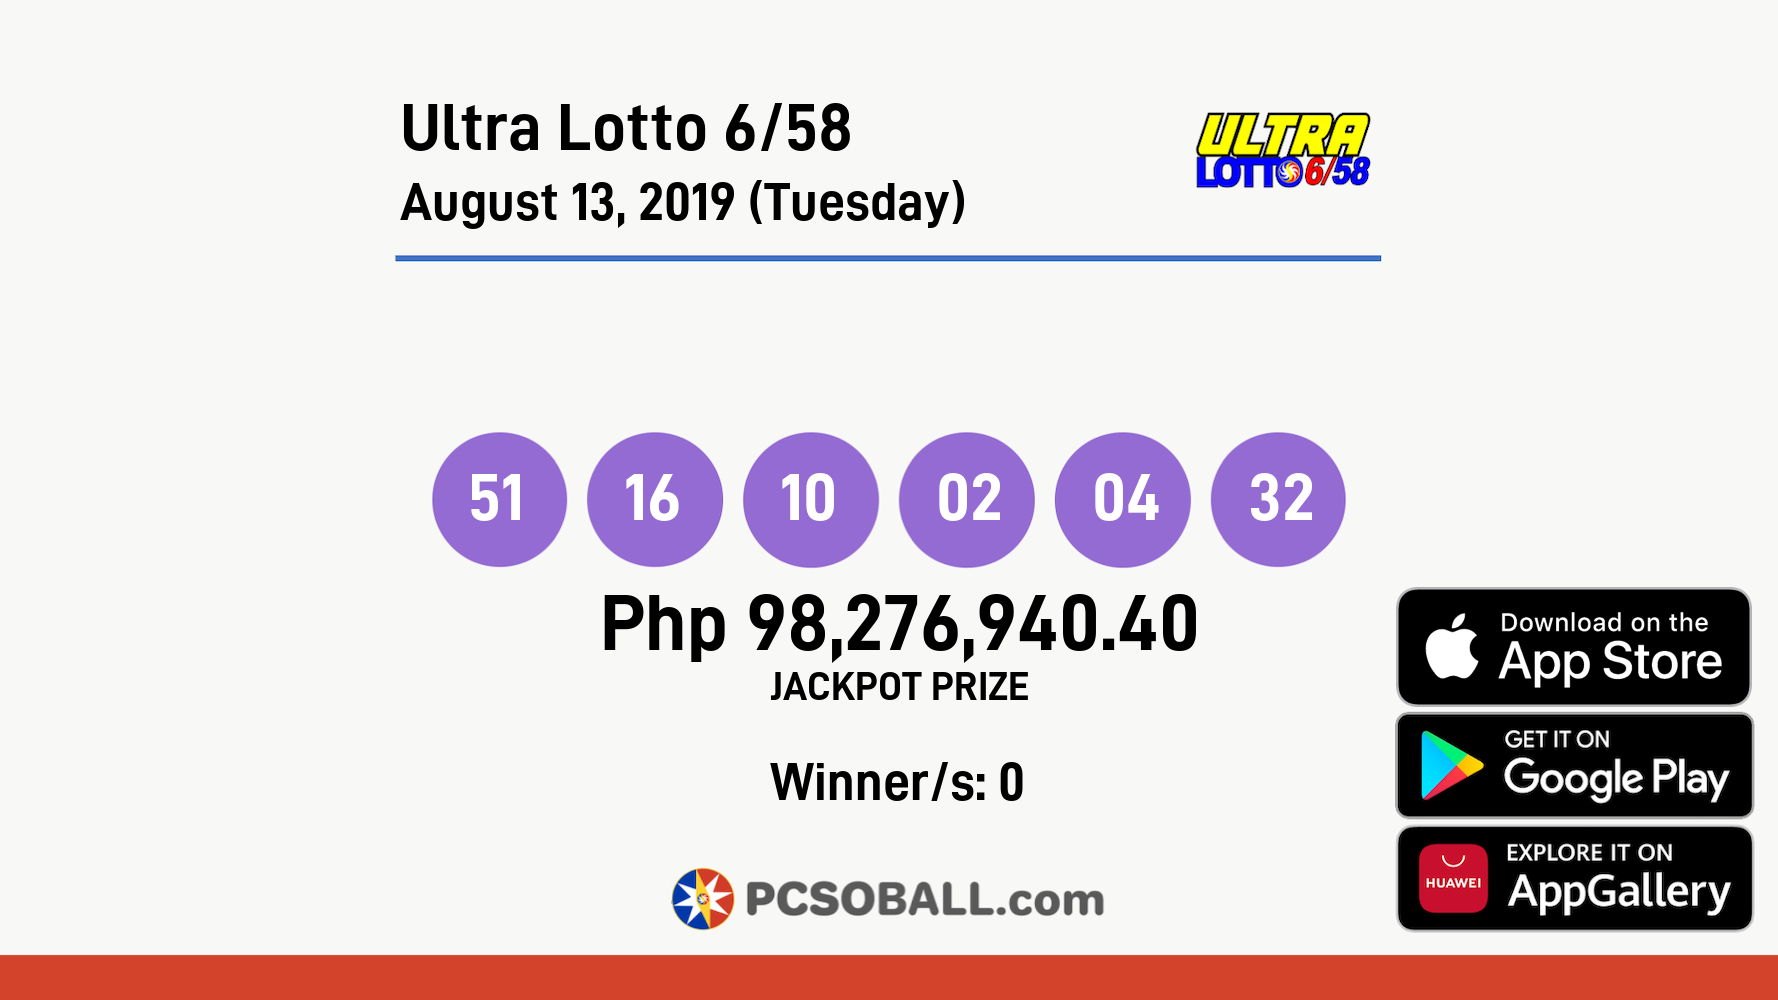 Ultra Lotto 6/58 August 13, 2019 (Tuesday) Result